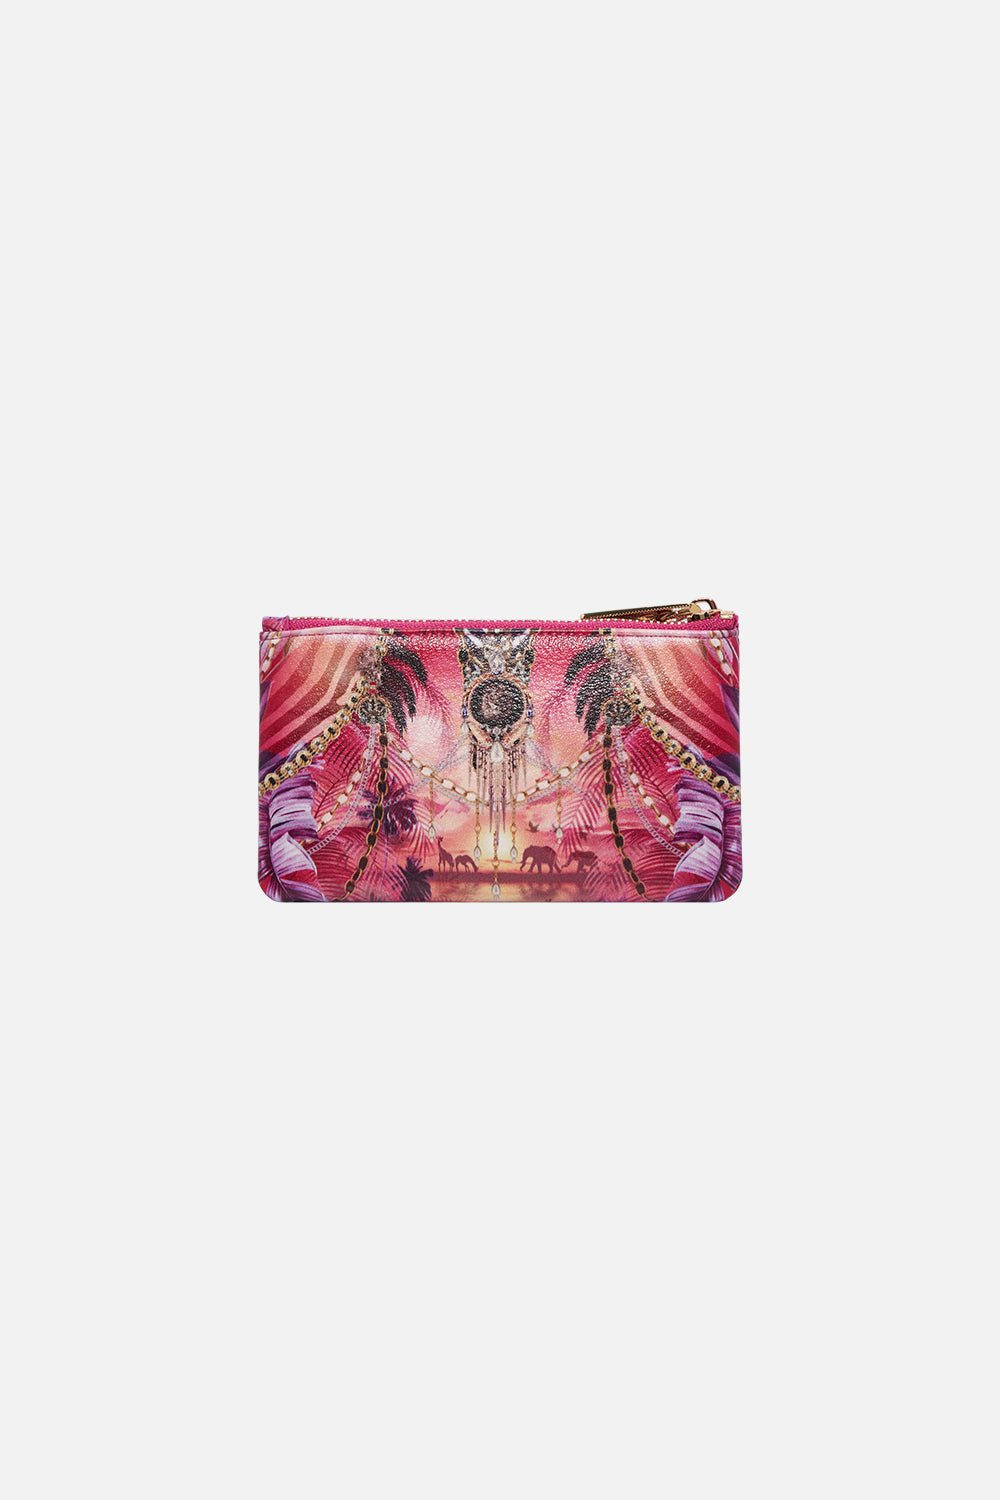 Detail view of CAMILLA cardholder in Wild Loving print